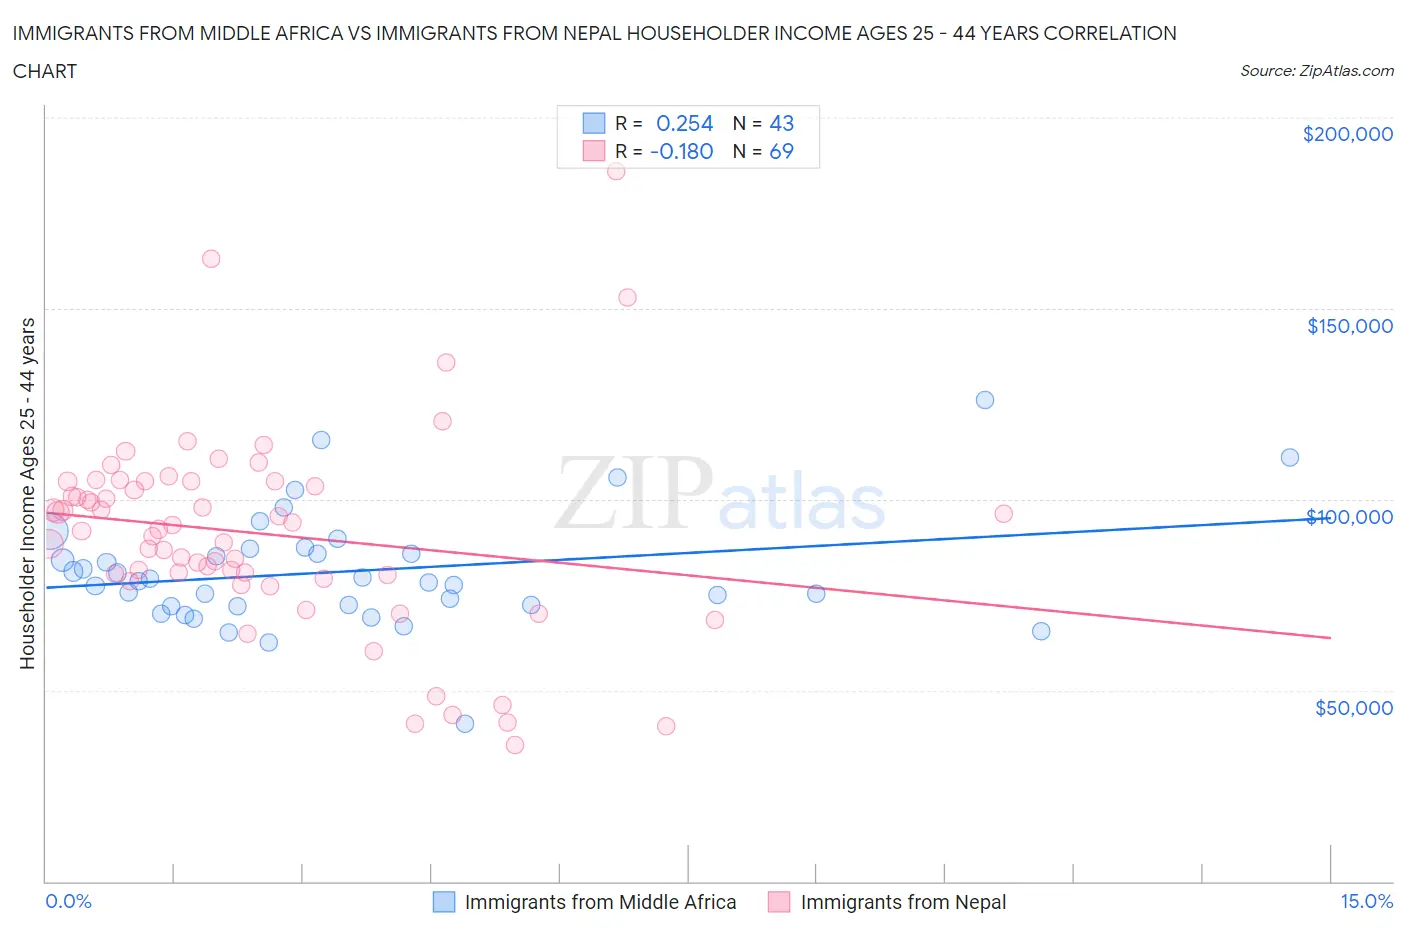 Immigrants from Middle Africa vs Immigrants from Nepal Householder Income Ages 25 - 44 years